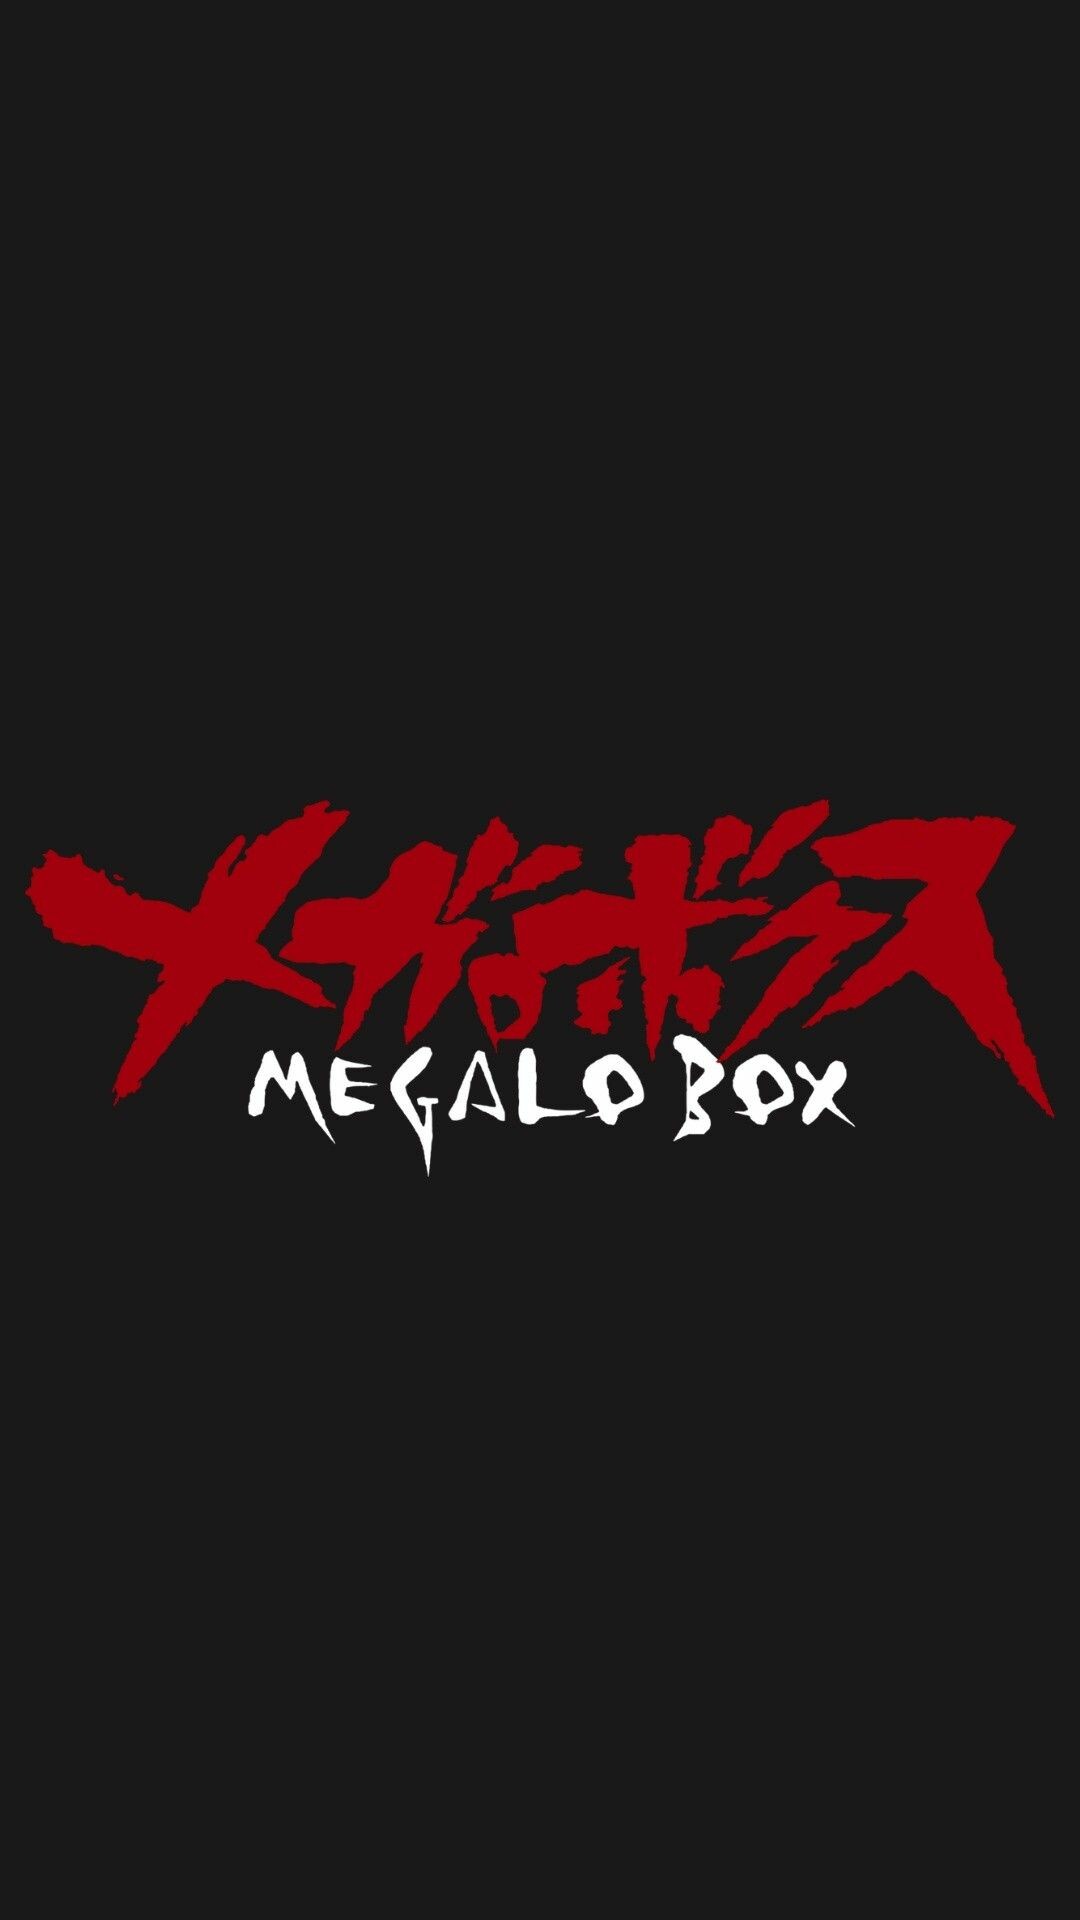 Megalo Box: An anime series released in 2018 as part of the 50th year celebration of Tomorrow's Joe. 1080x1920 Full HD Background.